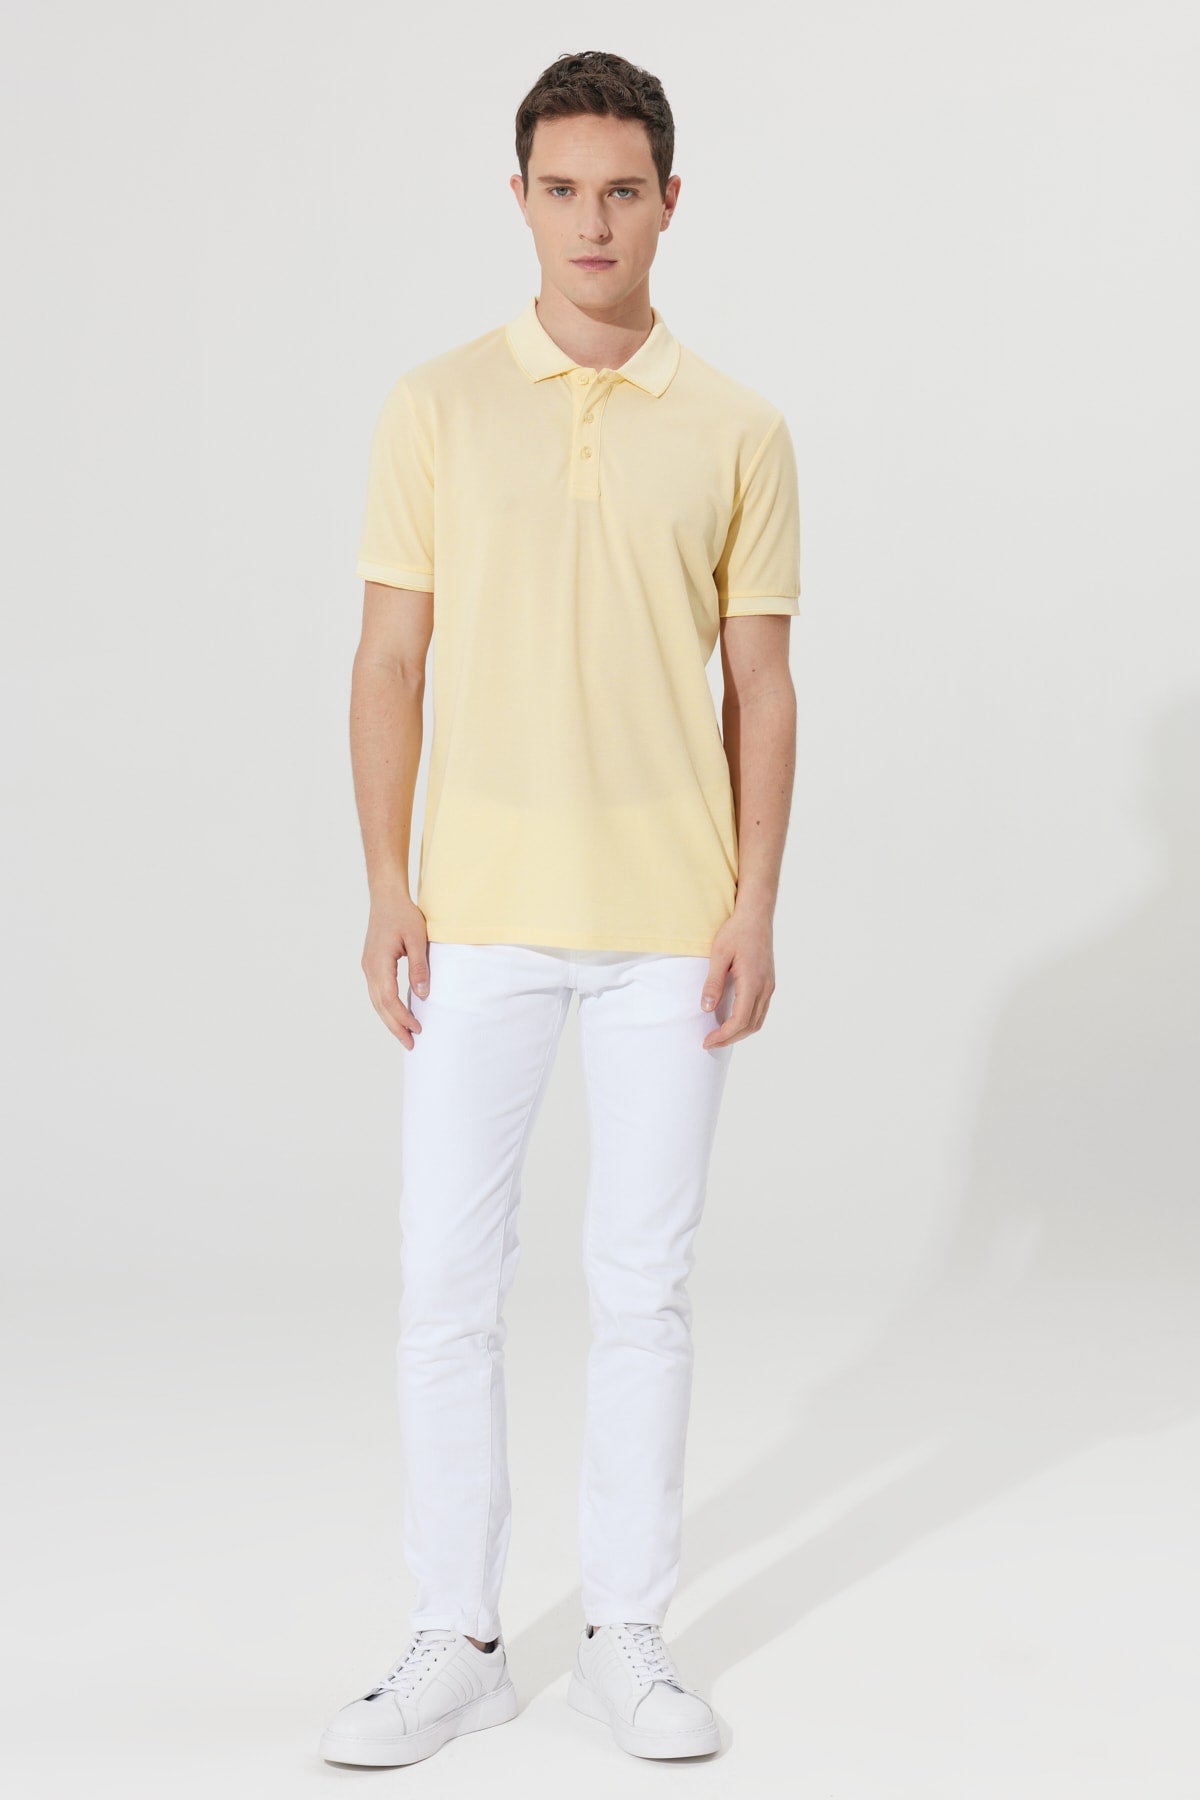 Men's Non-Shrink Cotton Fabric Slim Fit Slim Fit Yellow-White Anti-roll Polo Neck T-Shirt